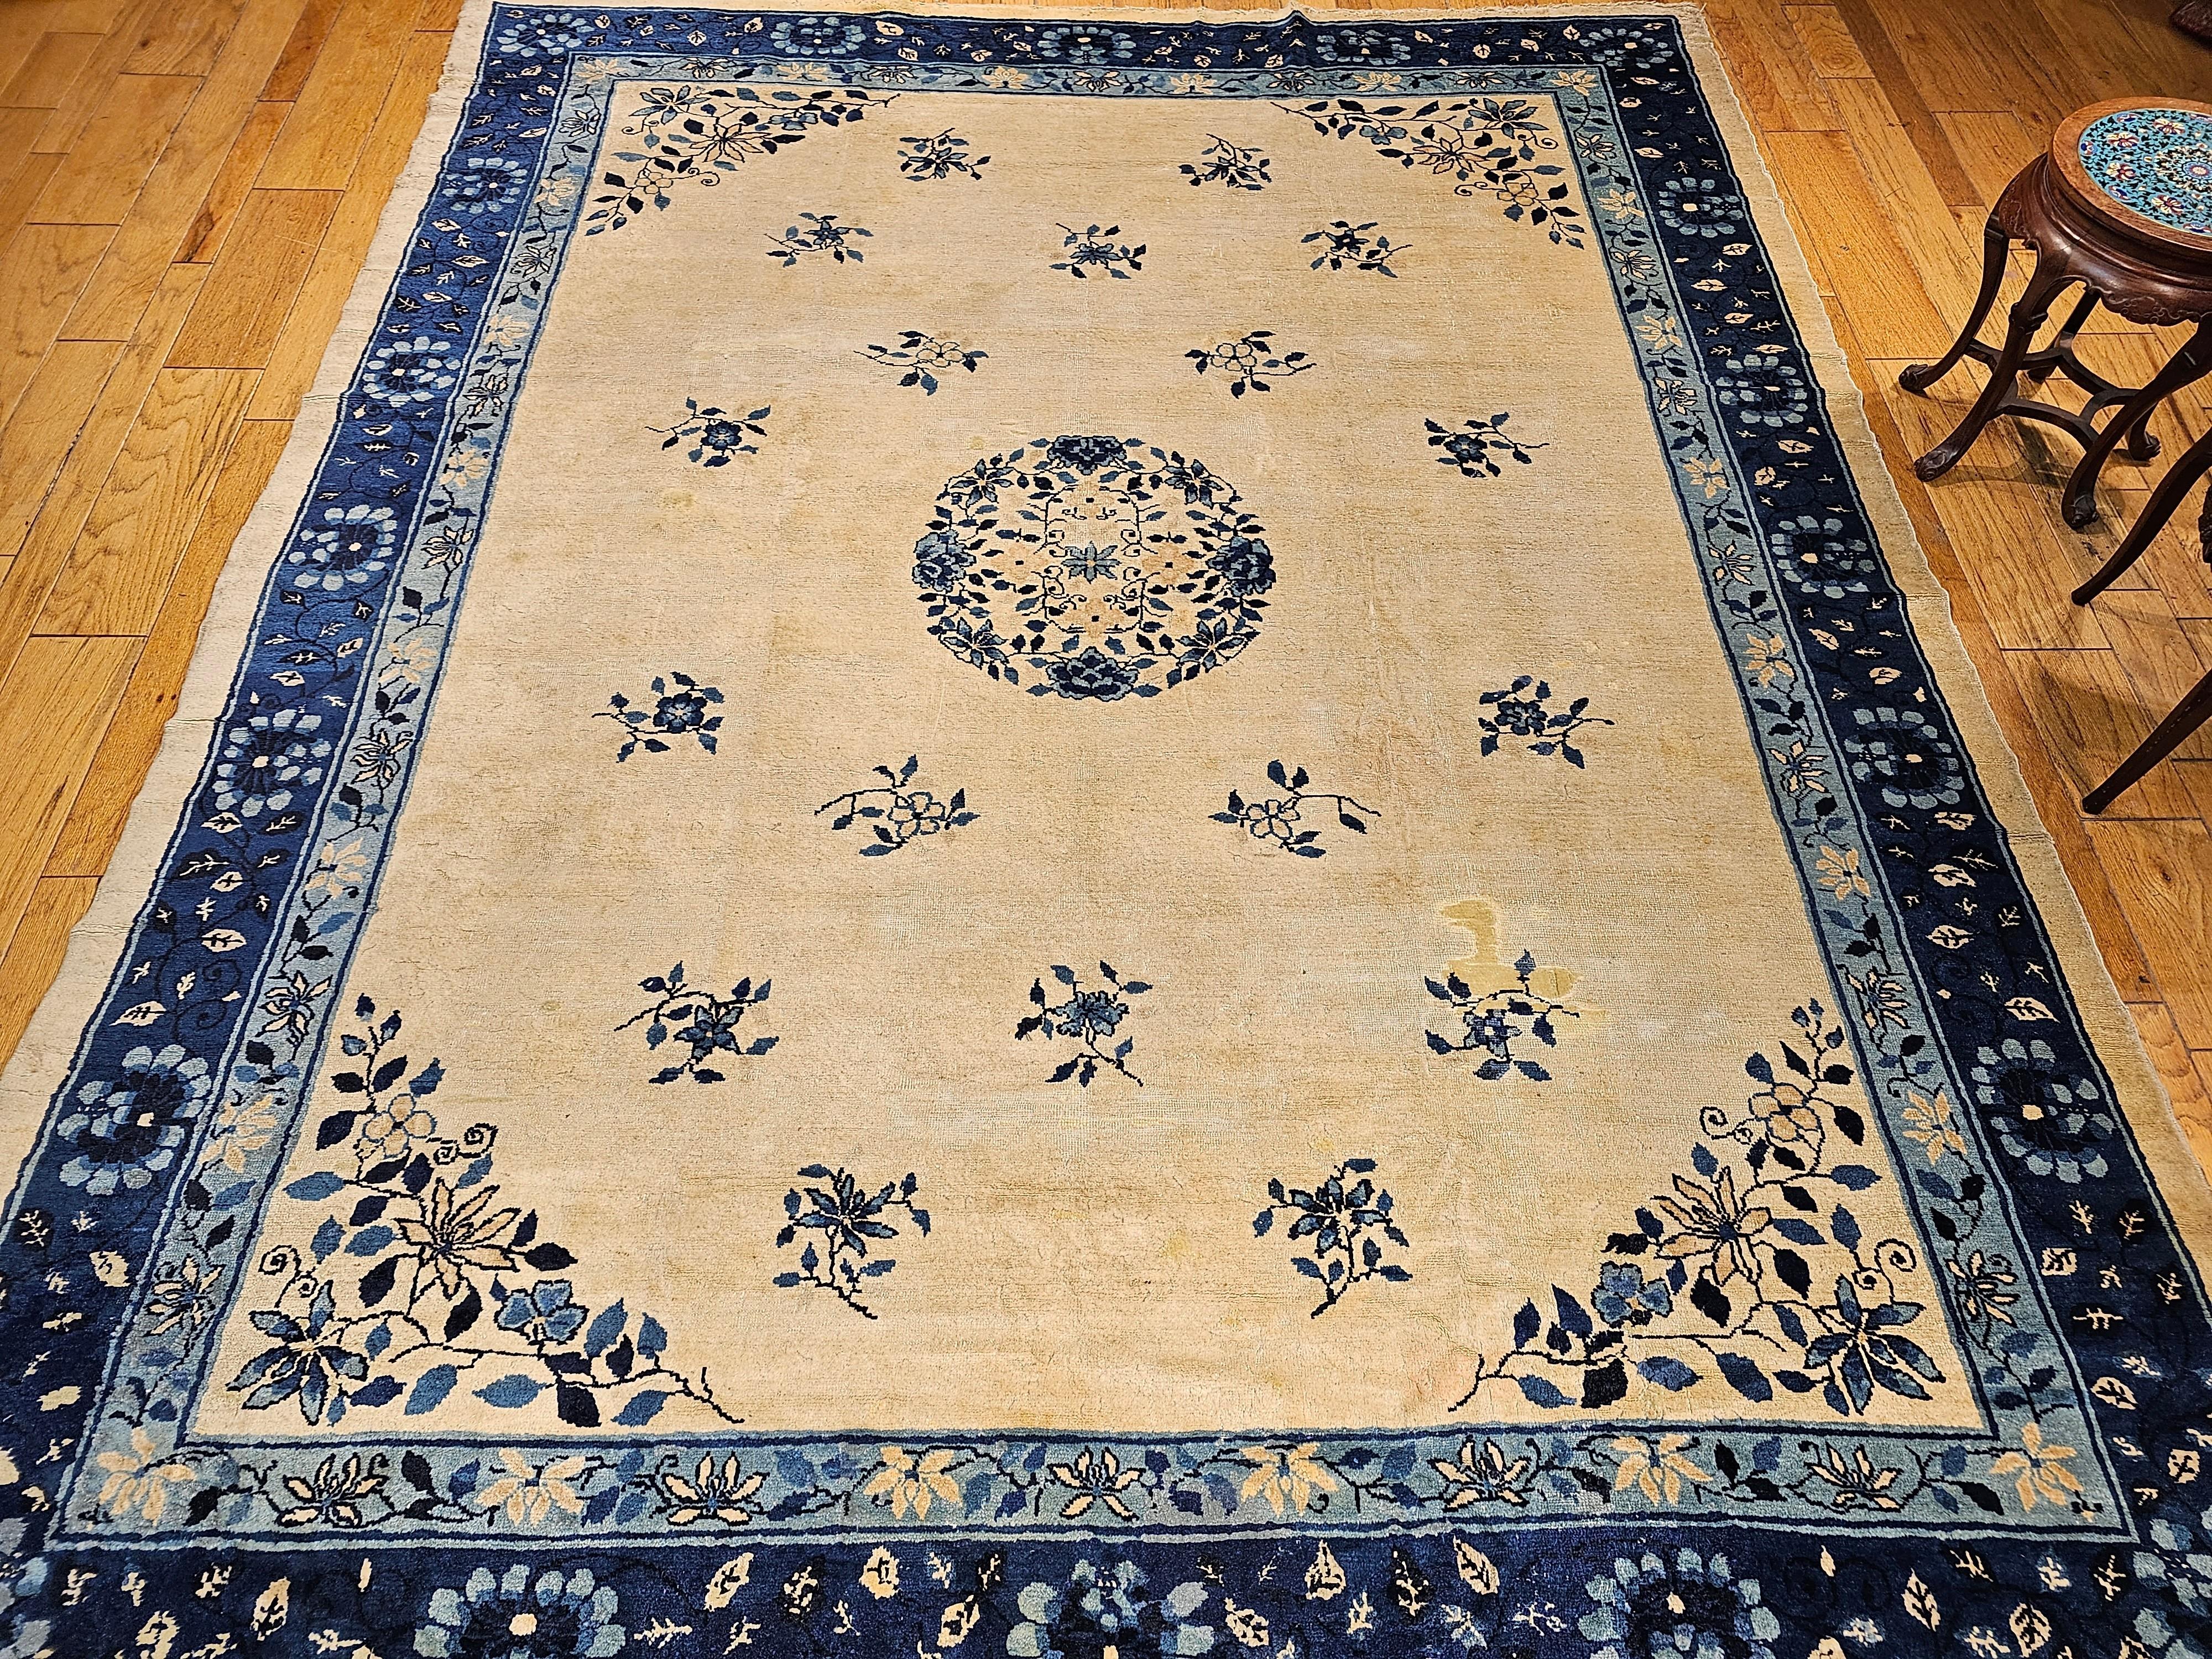 19th Century Room Size Chinese Peking Rug in Ivory, Navy, Baby Blue For Sale 8